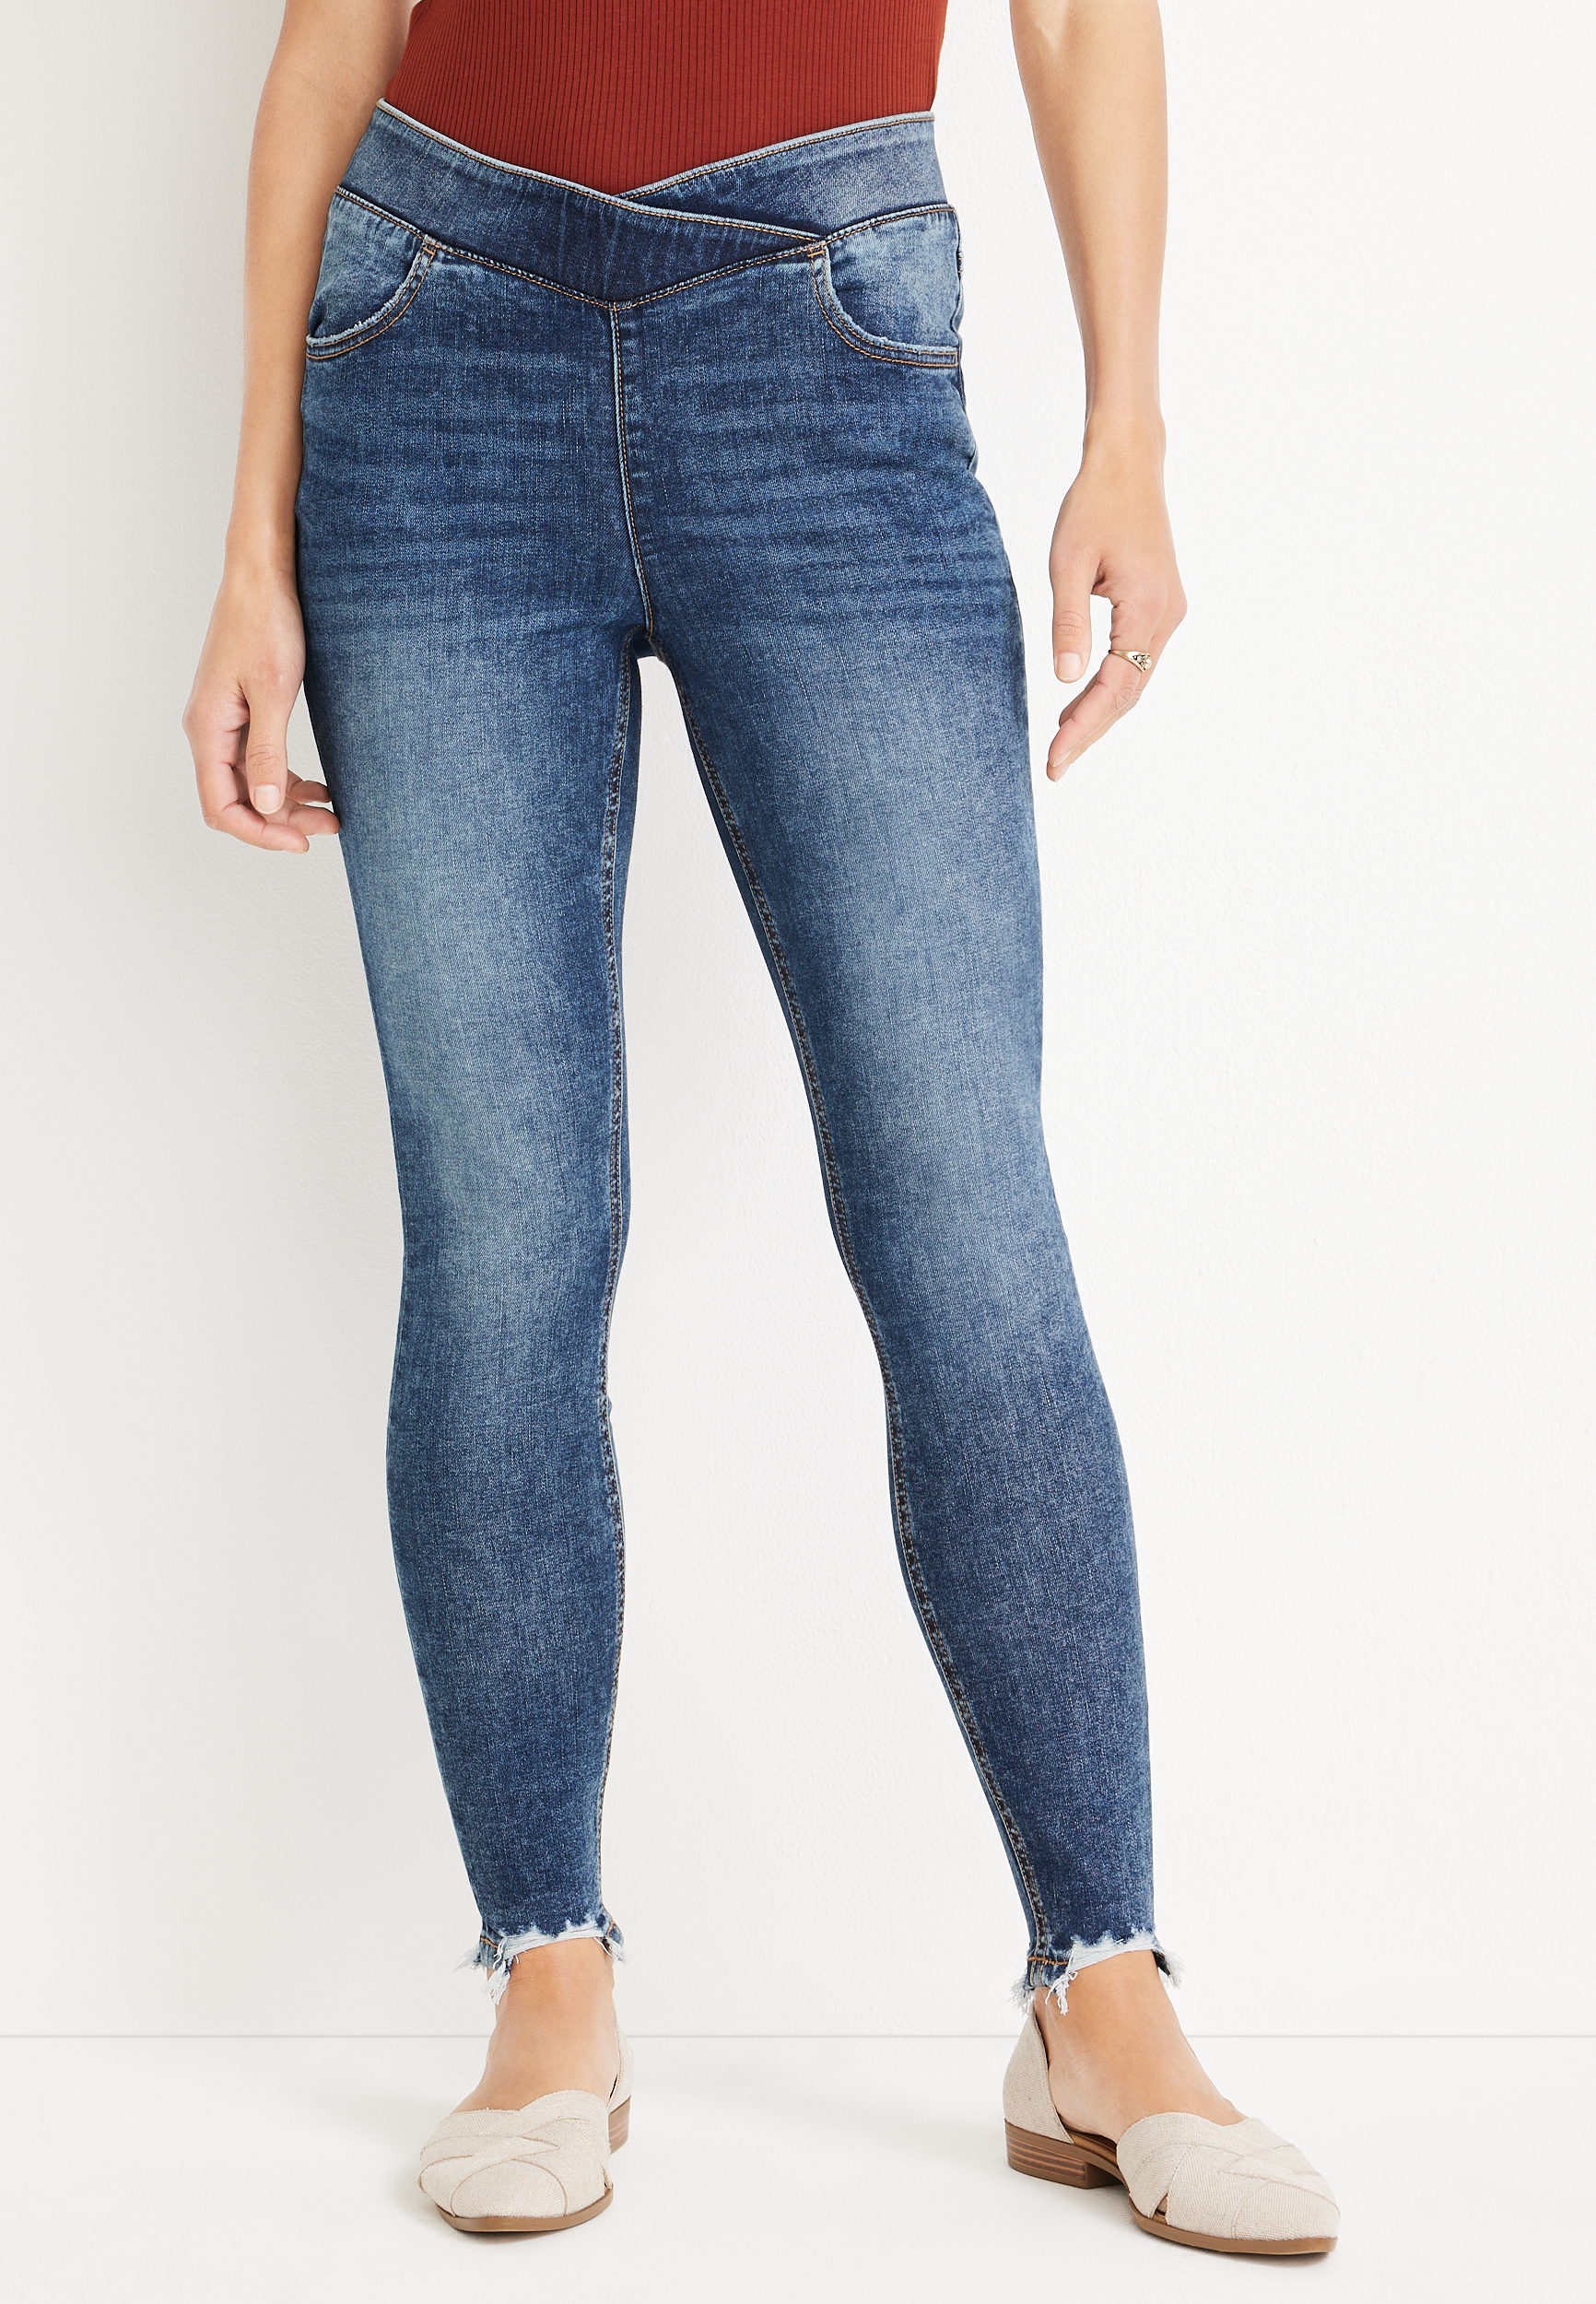 m jeans by maurices™ Cool Comfort Super Skinny High Rise Crossover